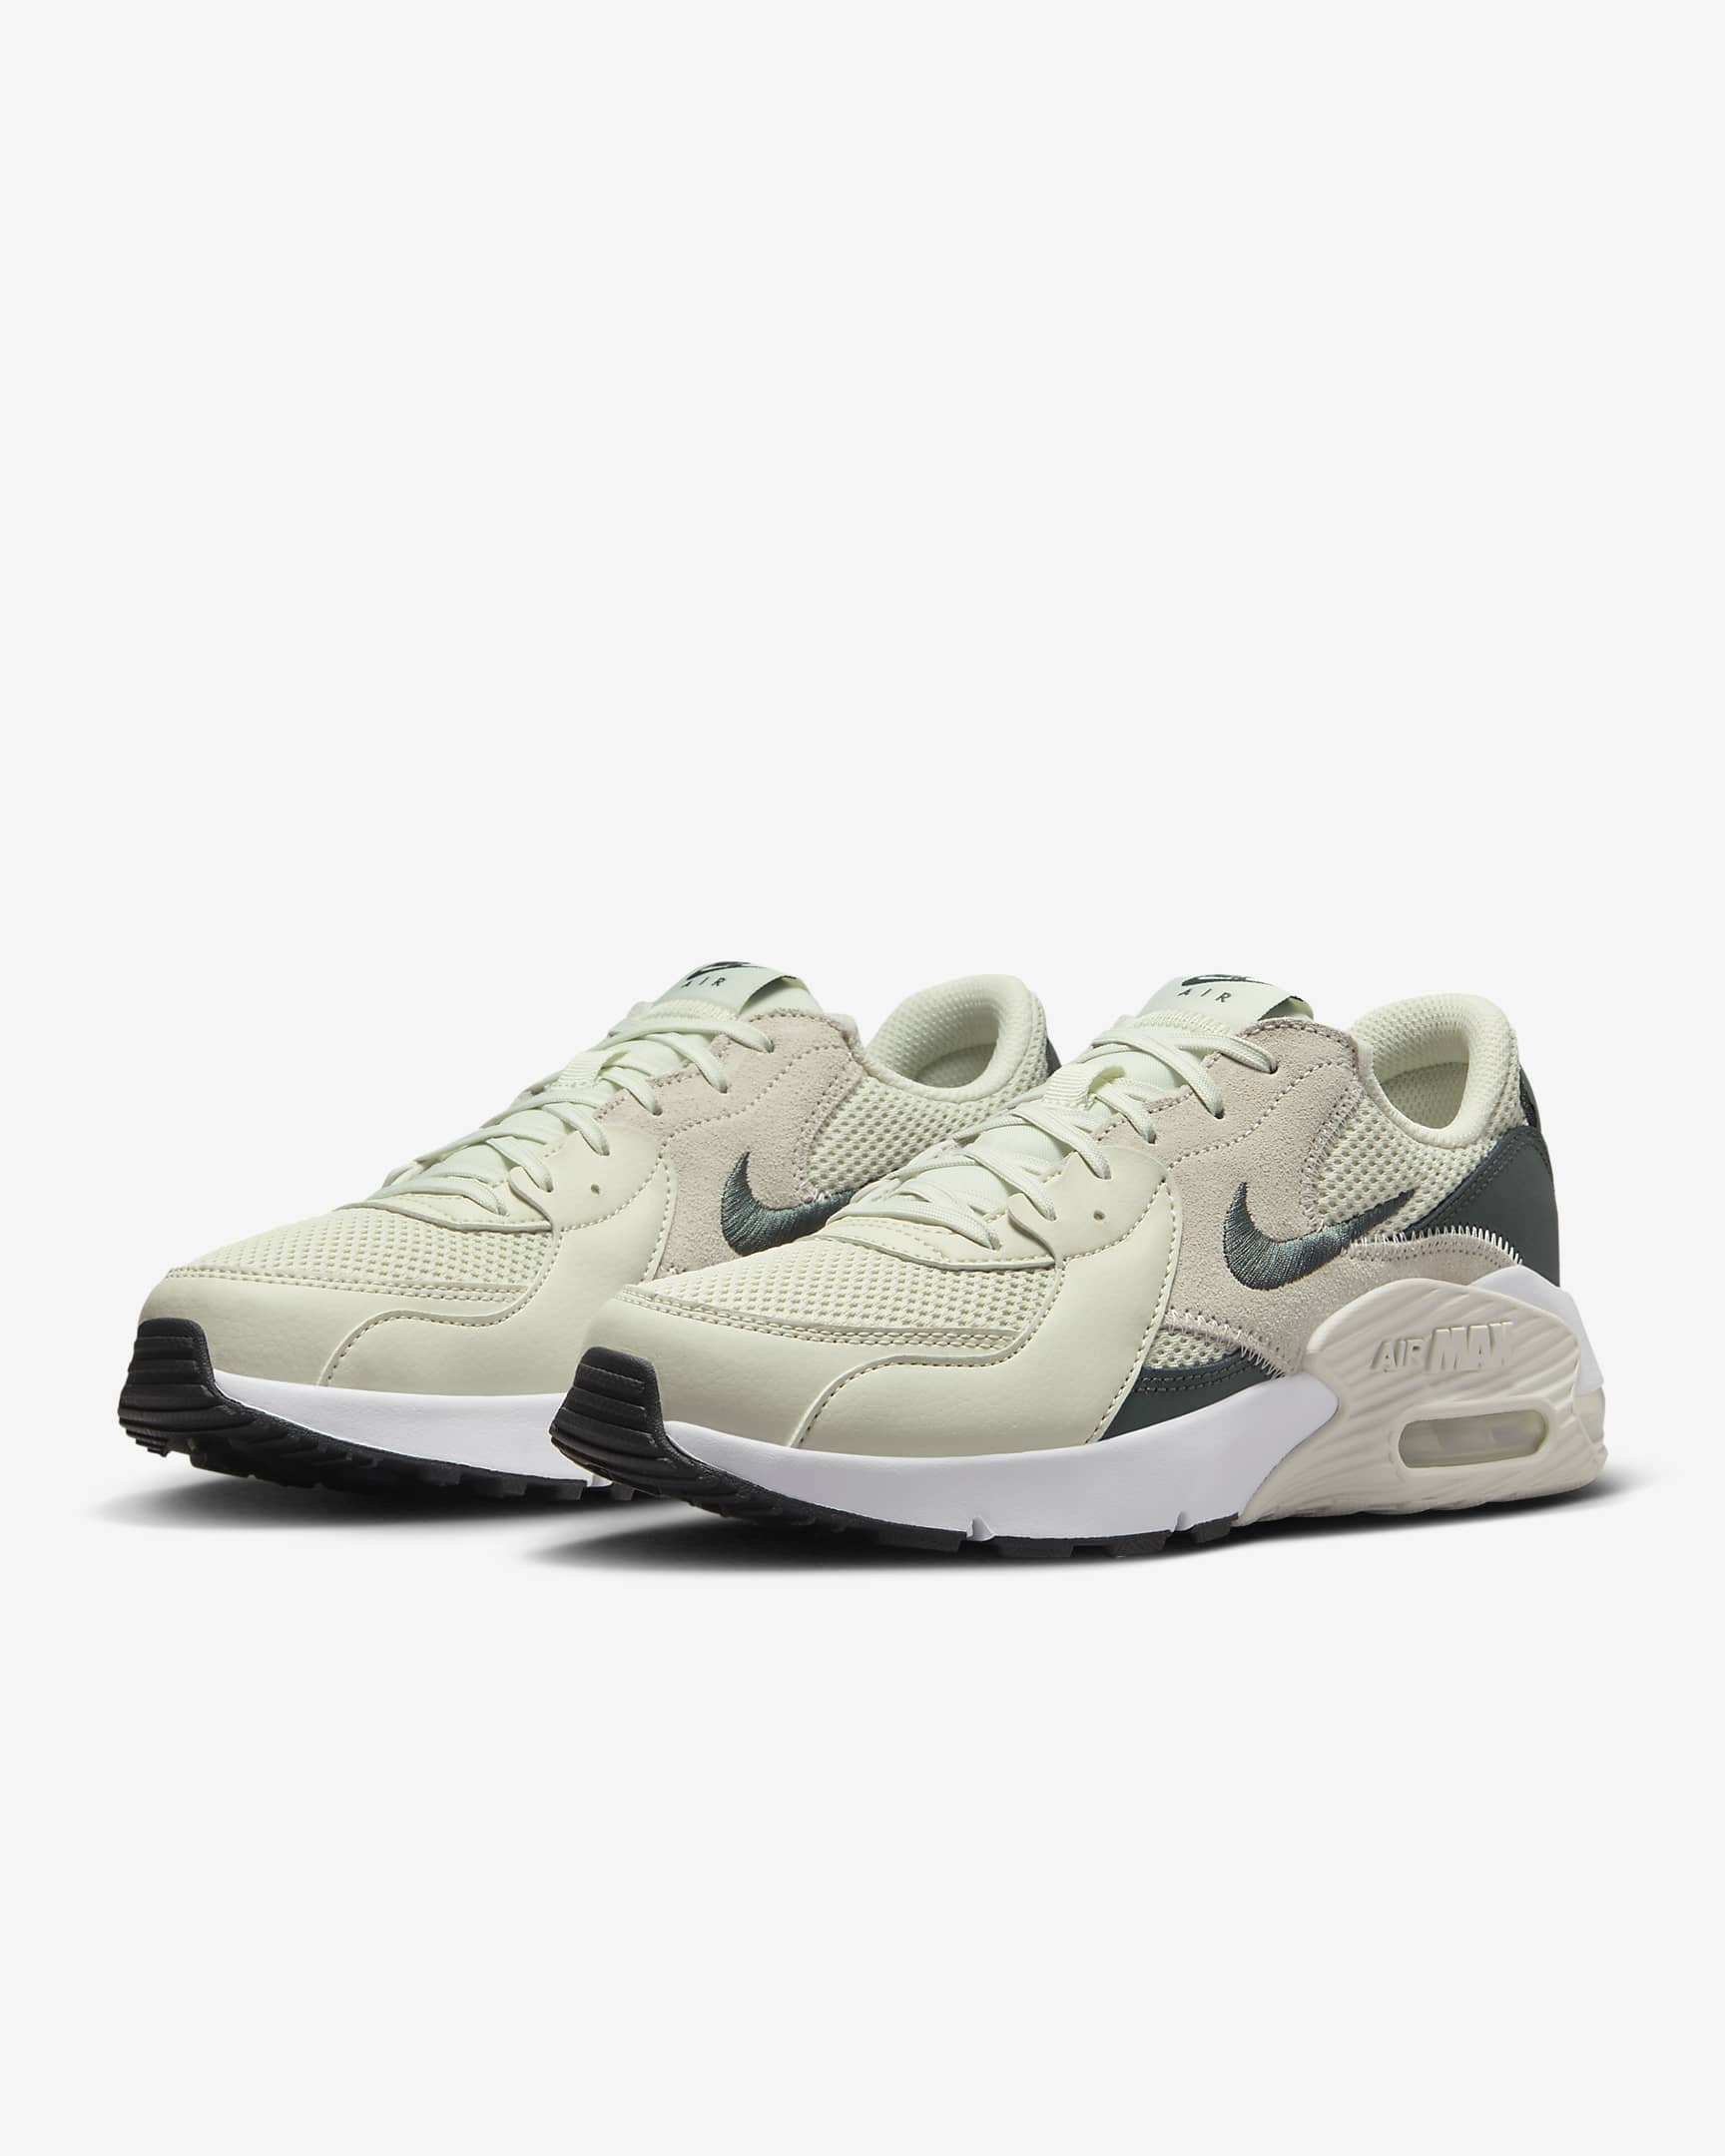 Nike Air Max Excee Women's Shoes - Sea Glass/White/Summit White/Vintage Green